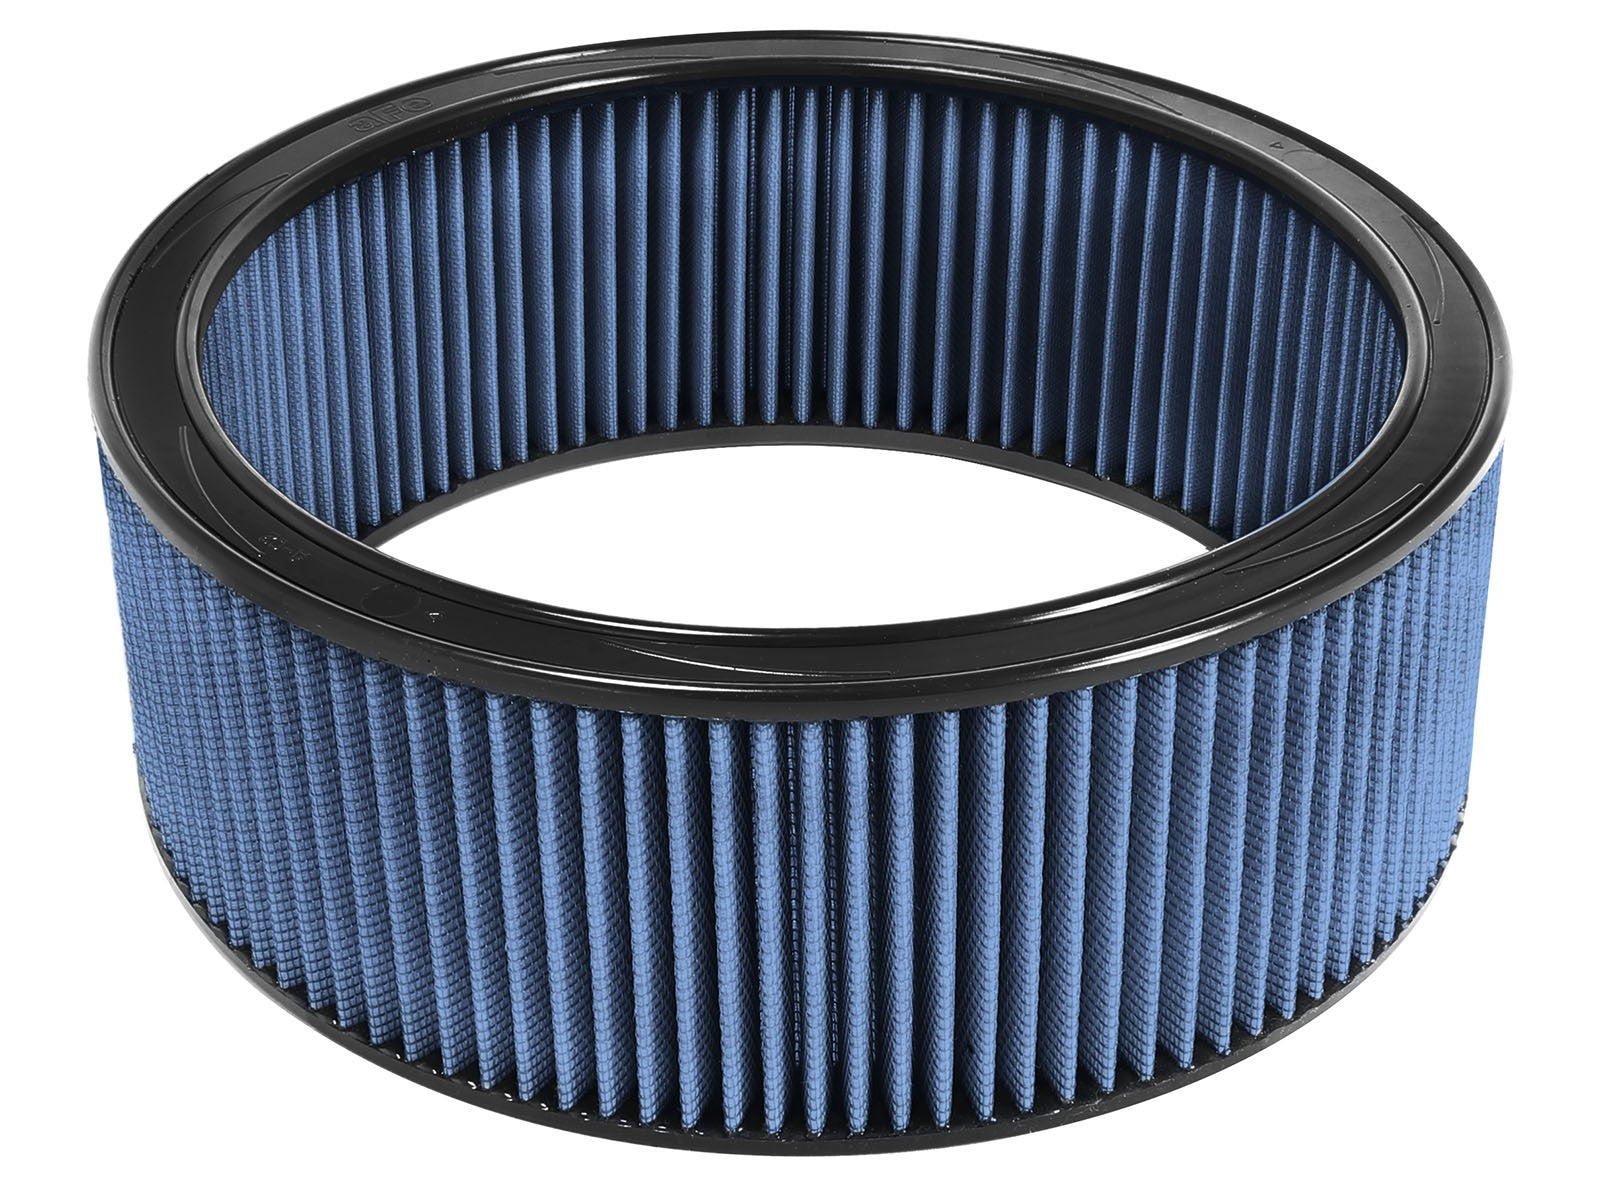 Magnum FLOW Round Racing Air Filter w/ Pro 5R Media 14 IN OD x 12 IN ID x 5 IN H